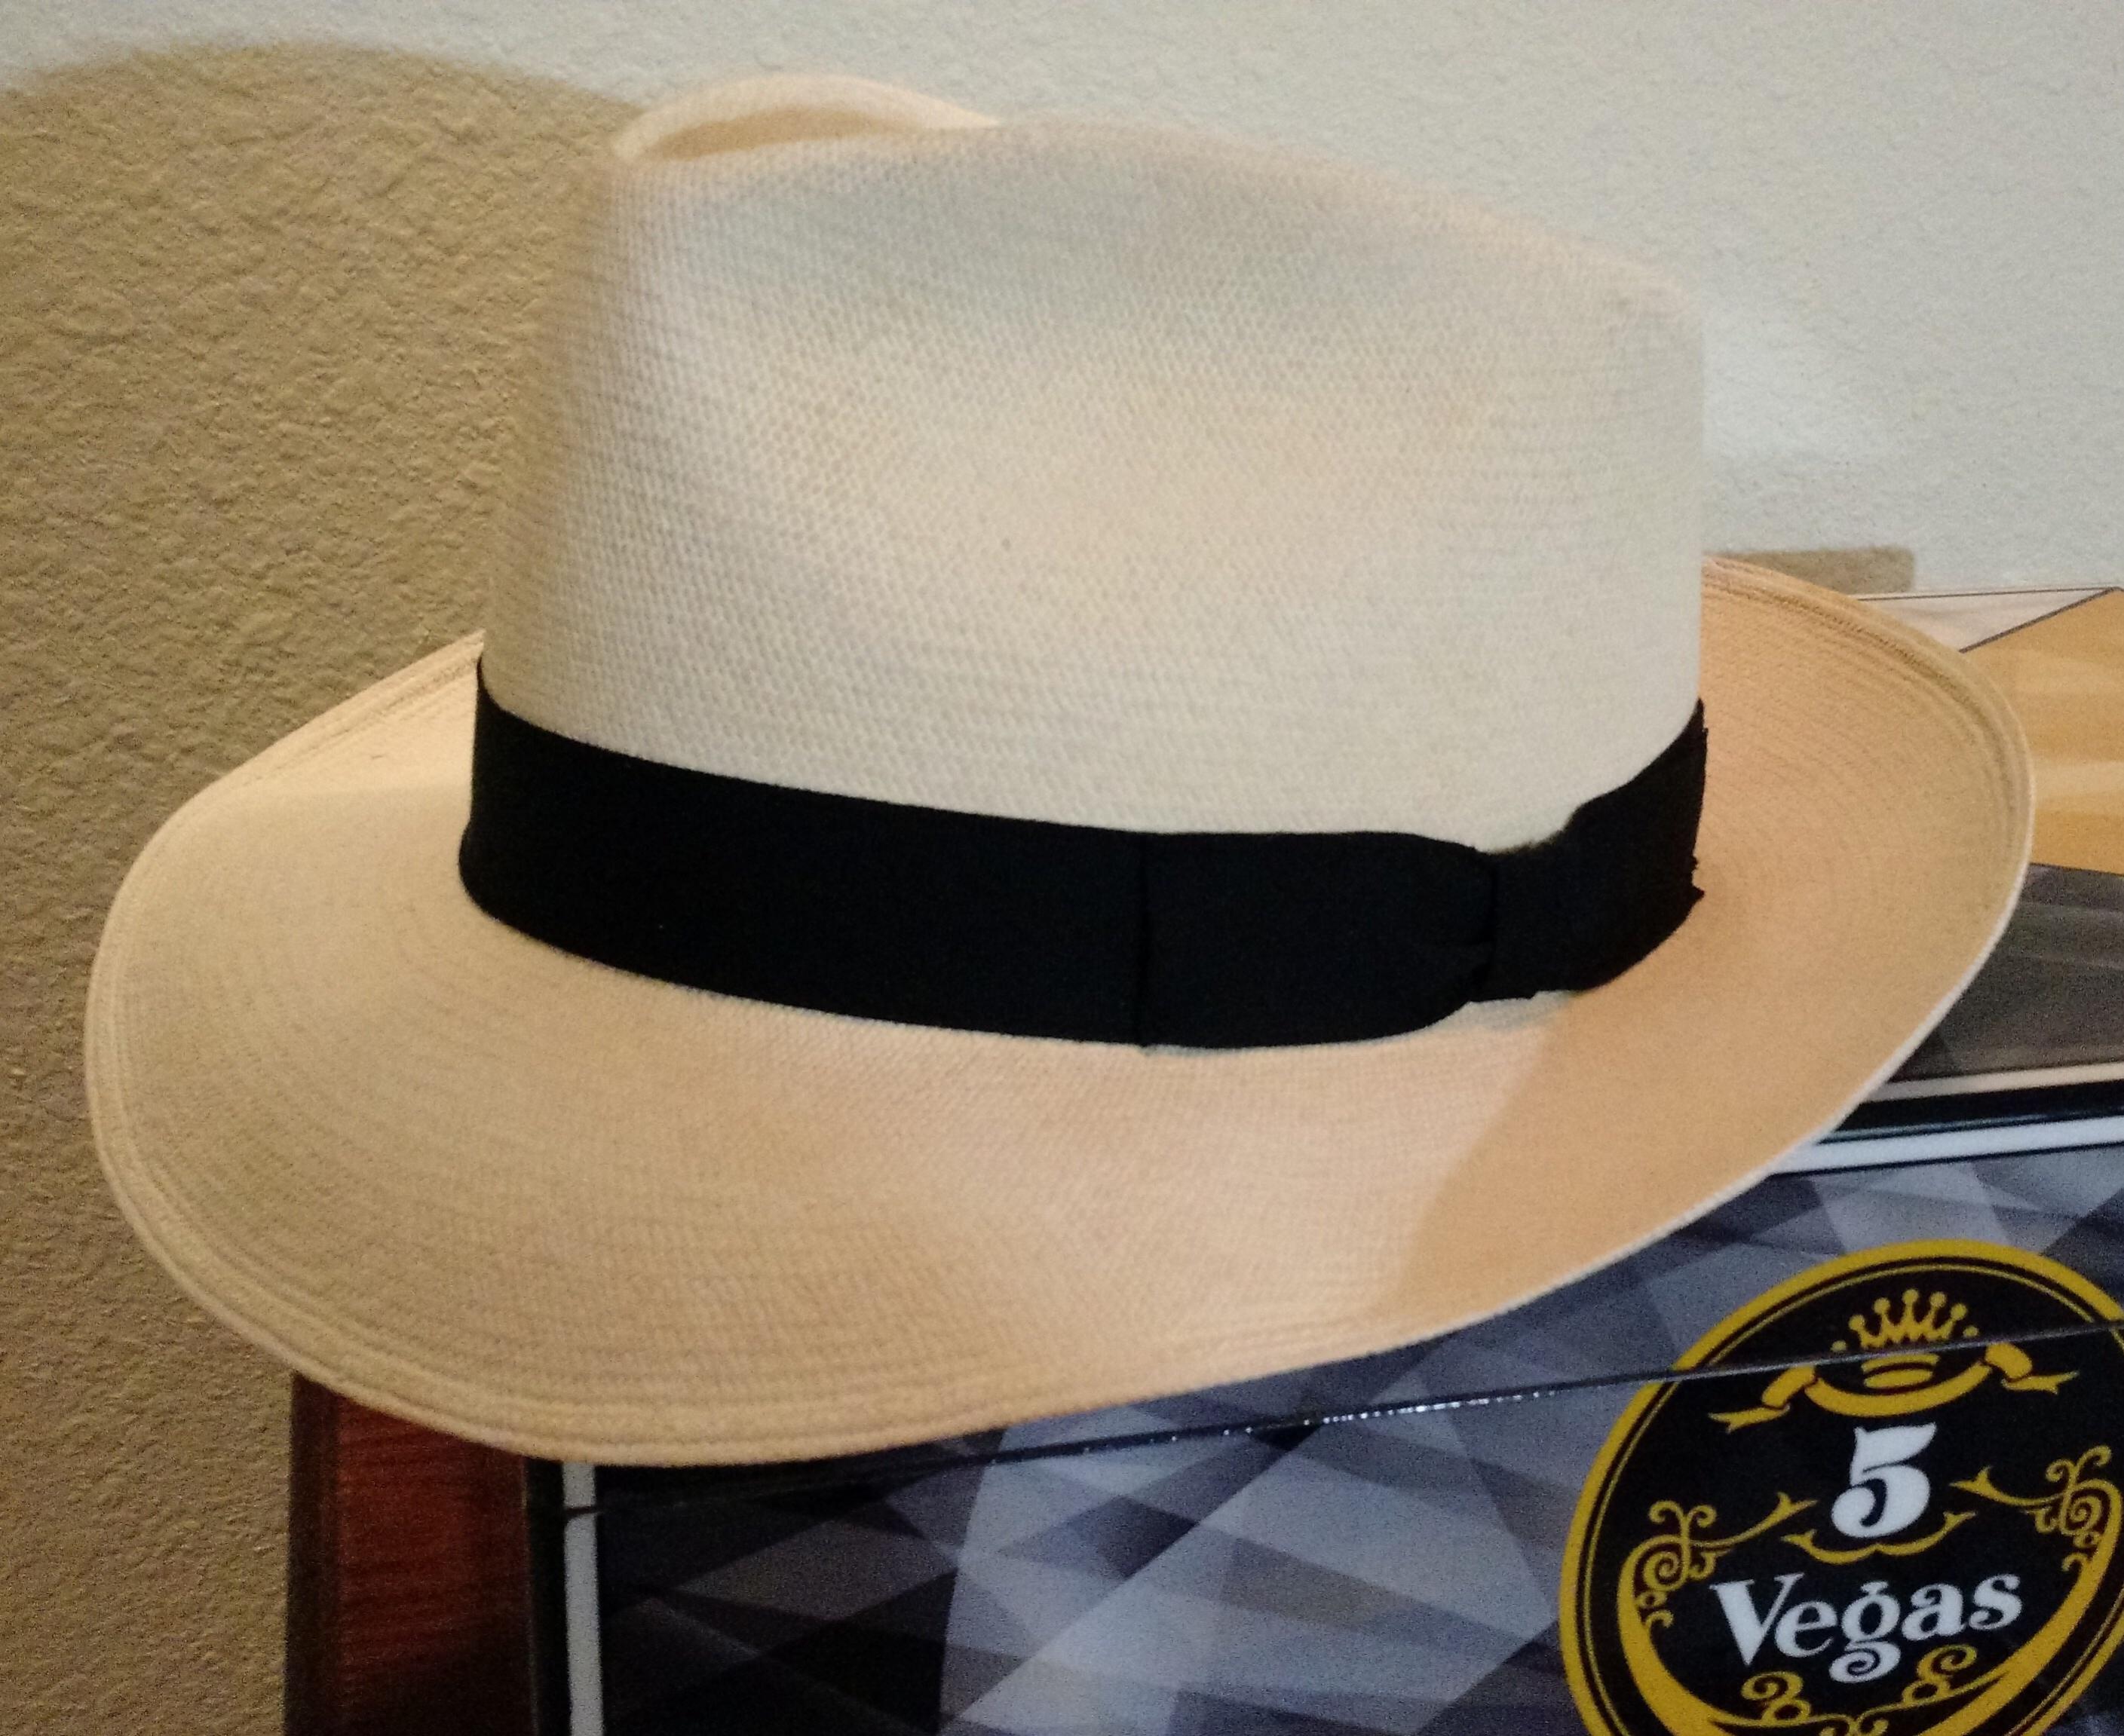 Post New Hats Here! | Page 1335 | The Fedora Lounge